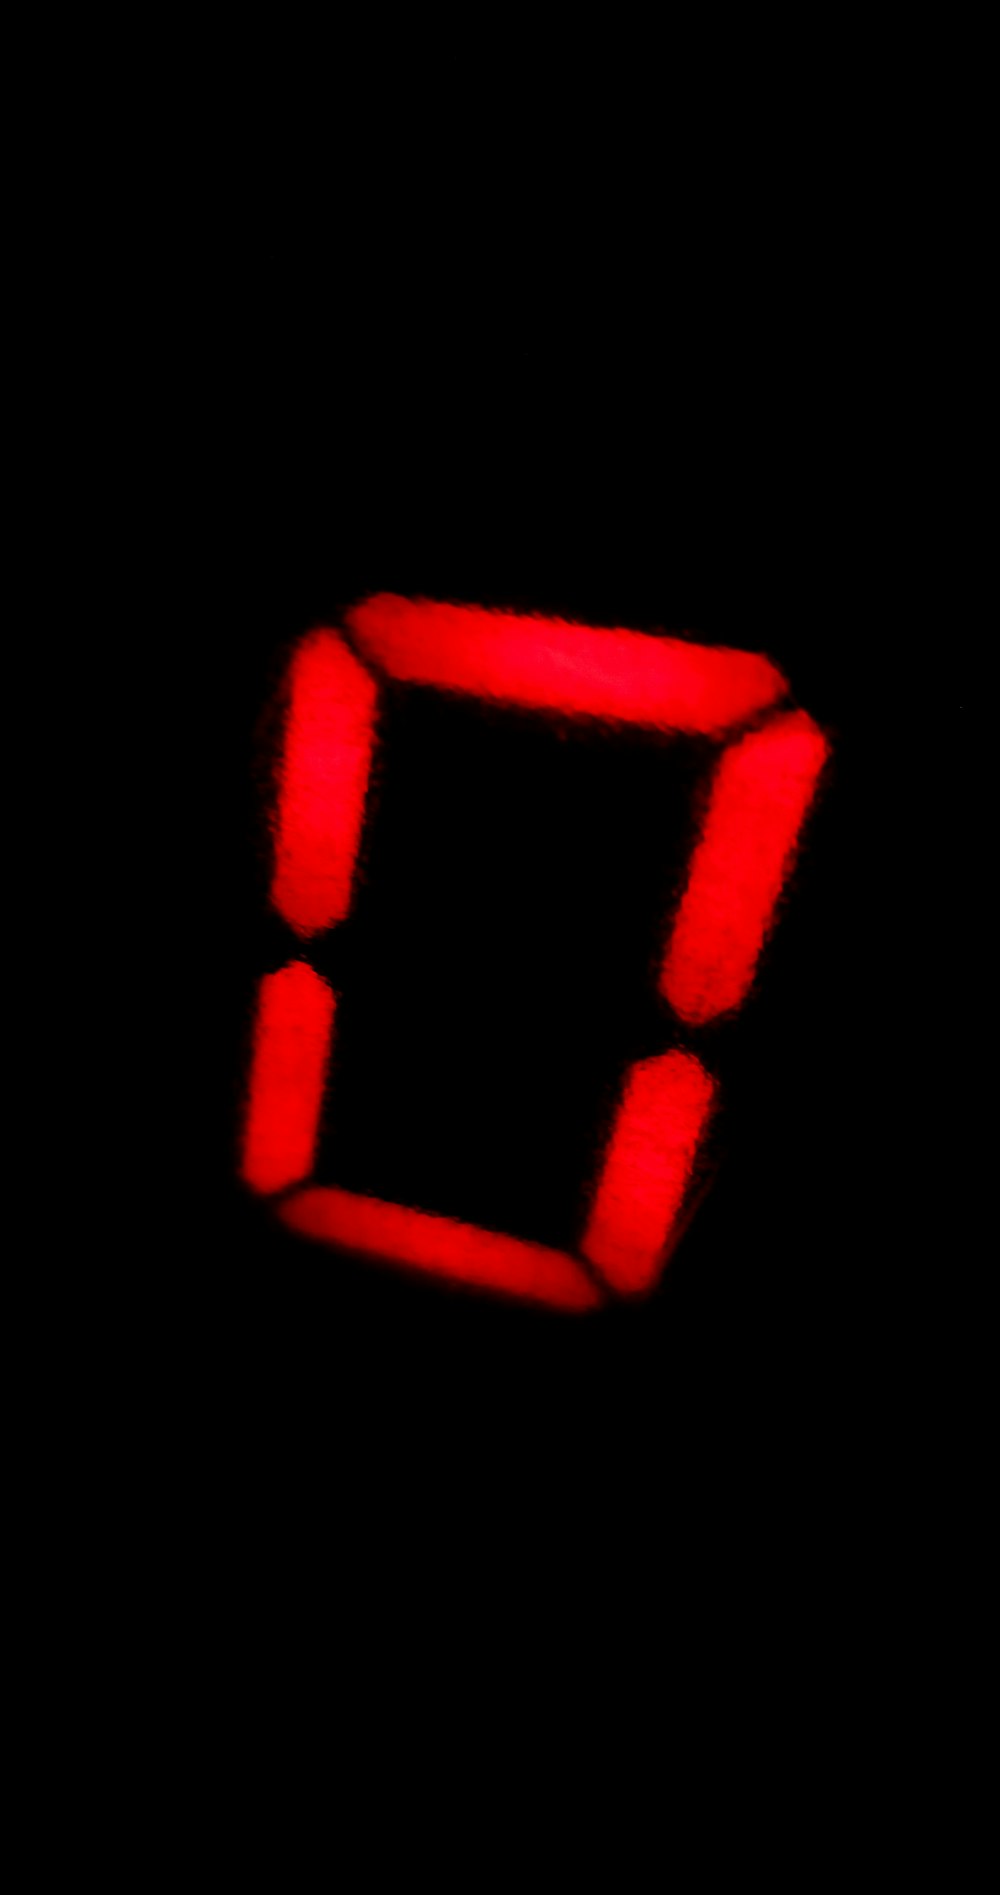 a red clock with a black background